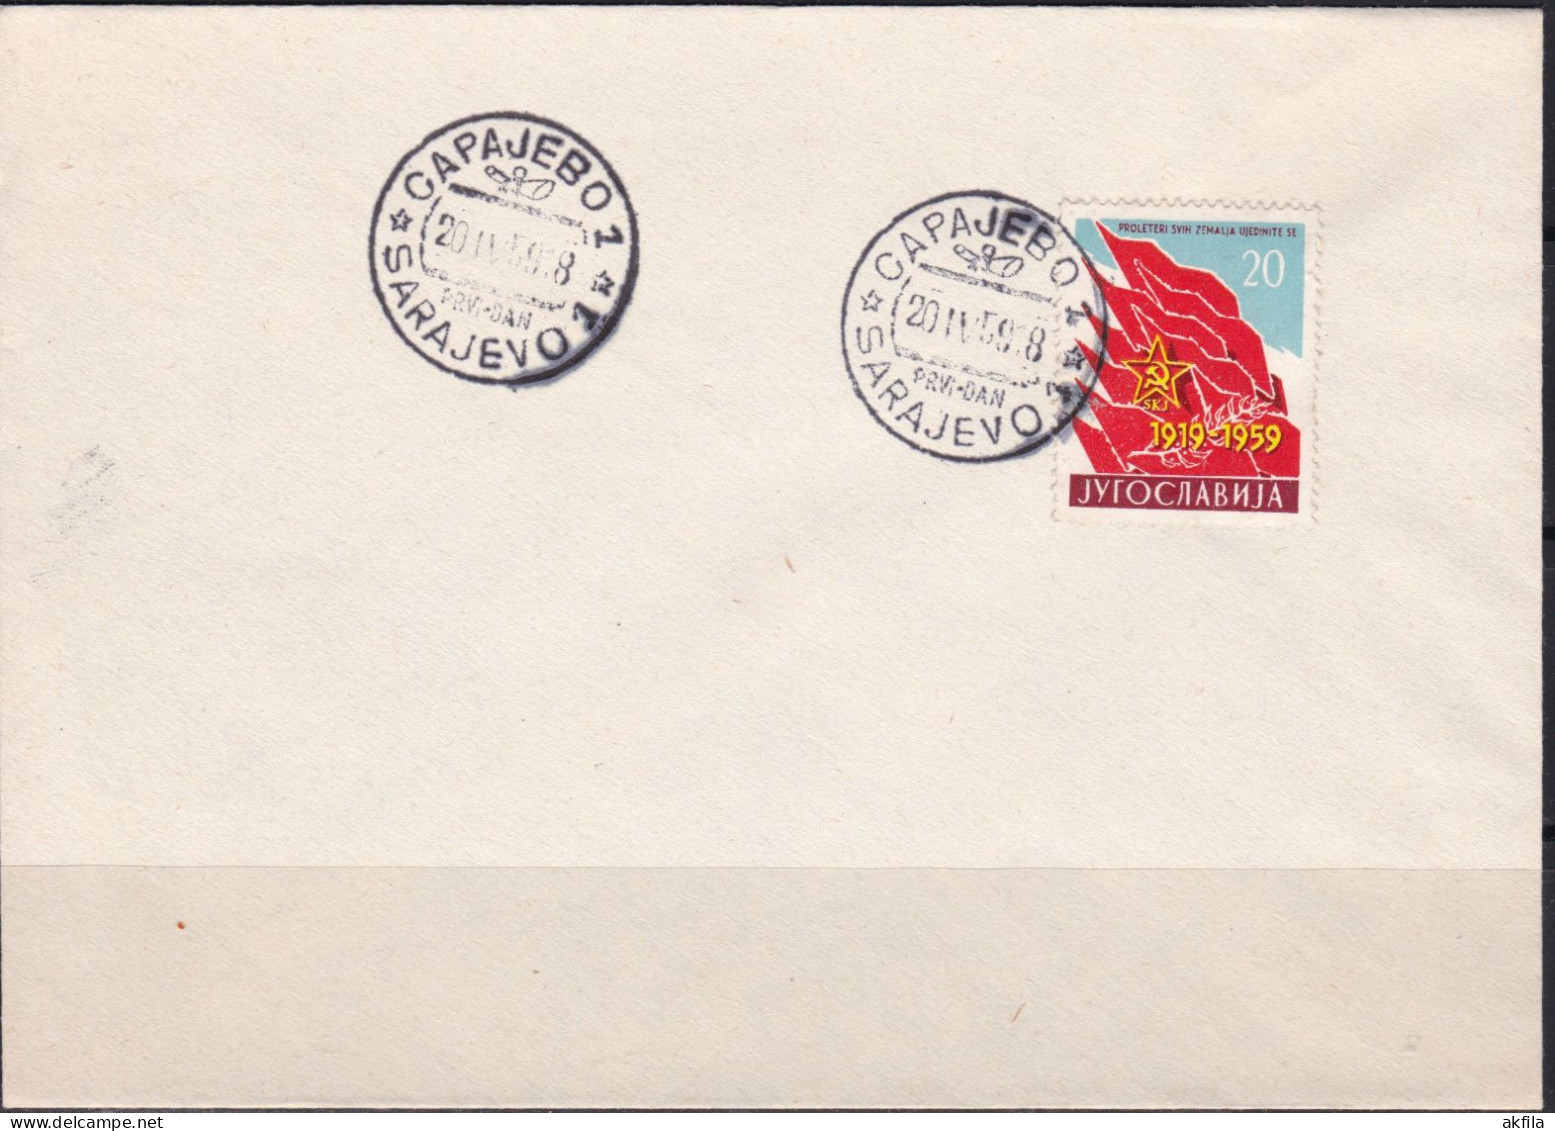 Yugoslavia 1959, 40 Years Of The Communist Party FDC - FDC